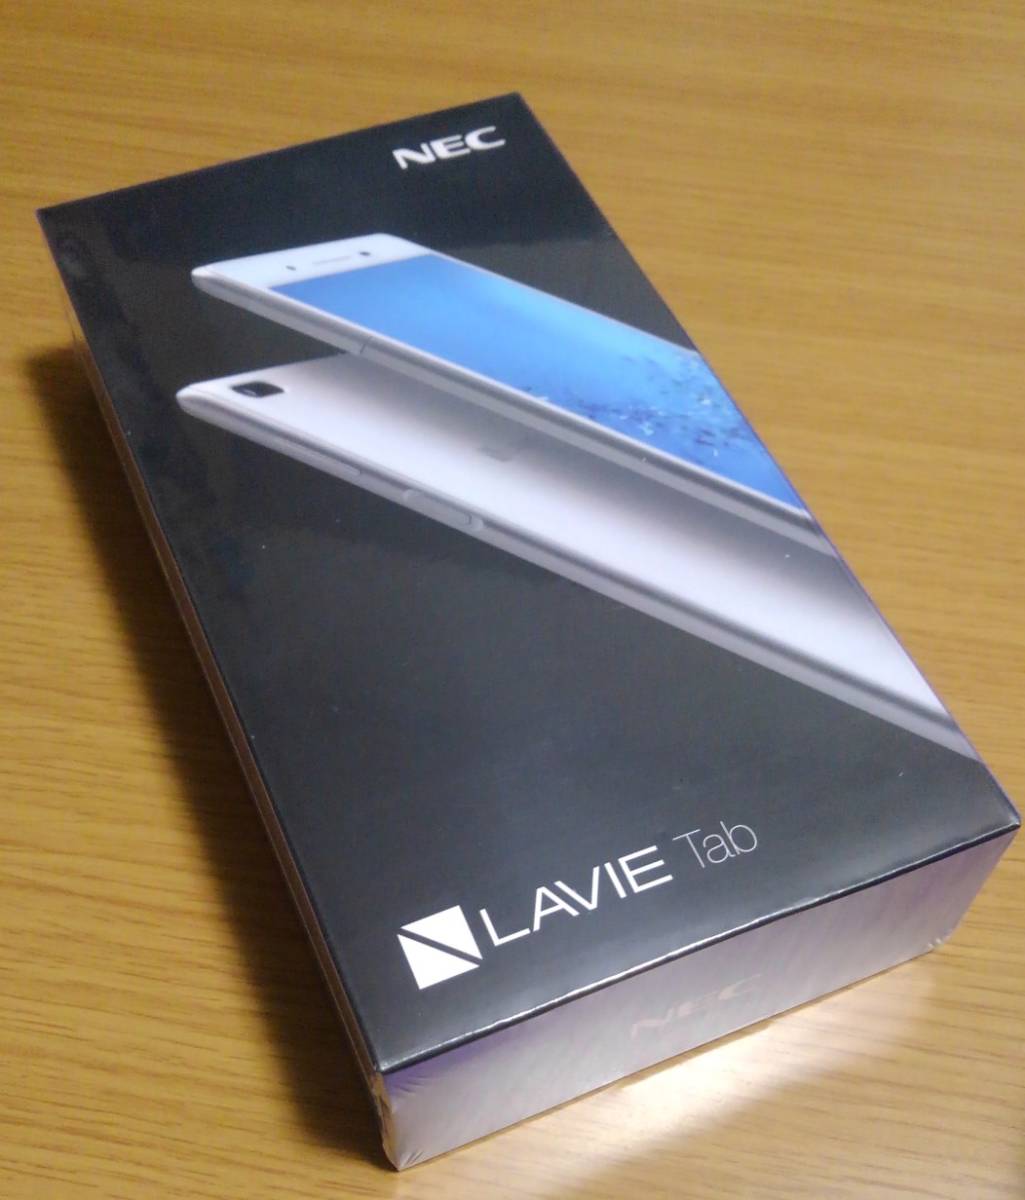 Nec 7 Type Tablet Personal Computer Lavie Tab E Te507 Jaw Android Os Memory 2gb Storage 16gb Wi Fi Model Pc Te507jaw Real Yahoo Auction Salling